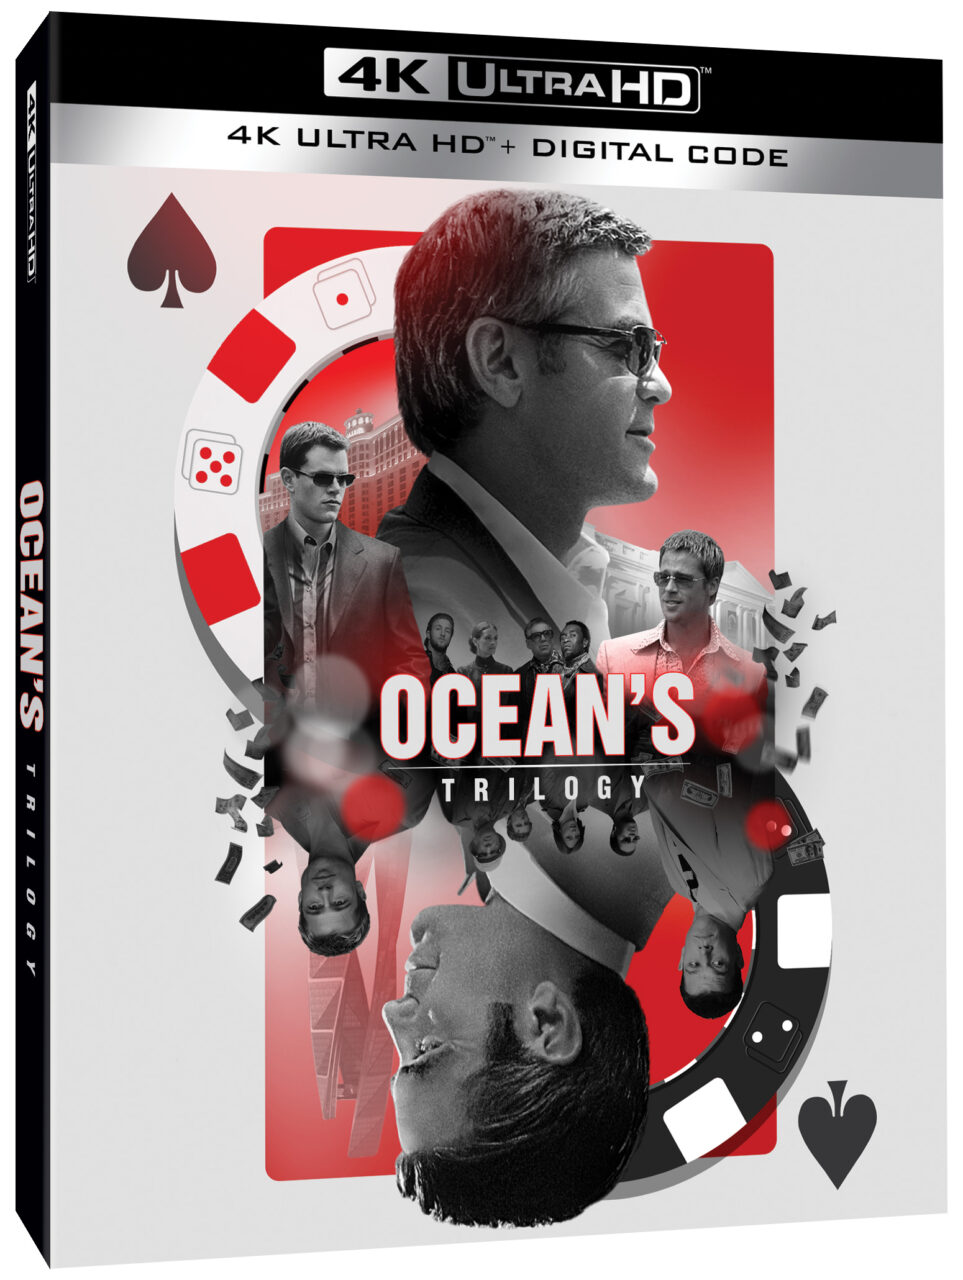 The Ocean's Trilogy (Ocean's 11, Ocean's 12, Ocean's 13) 4K Ultra HD Combo Pack cover (Warner Bros. Discovery Home Entertainment)